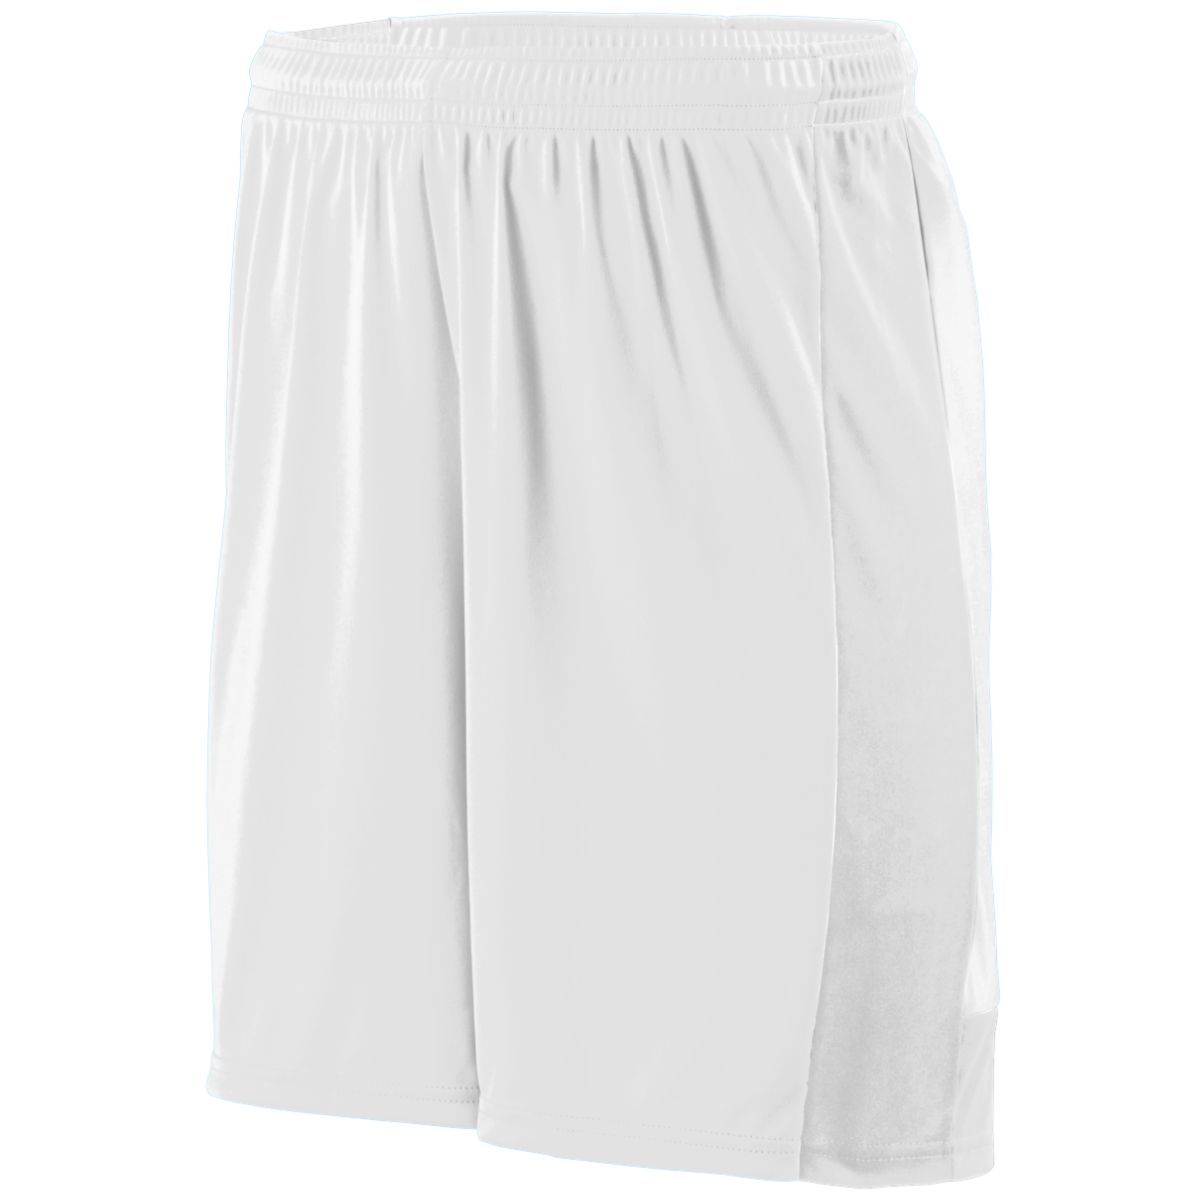 Augusta Sportswear Youth Lightning Shorts in White/White  -Part of the Youth, Youth-Shorts, Augusta-Products, Soccer, All-Sports-1 product lines at KanaleyCreations.com